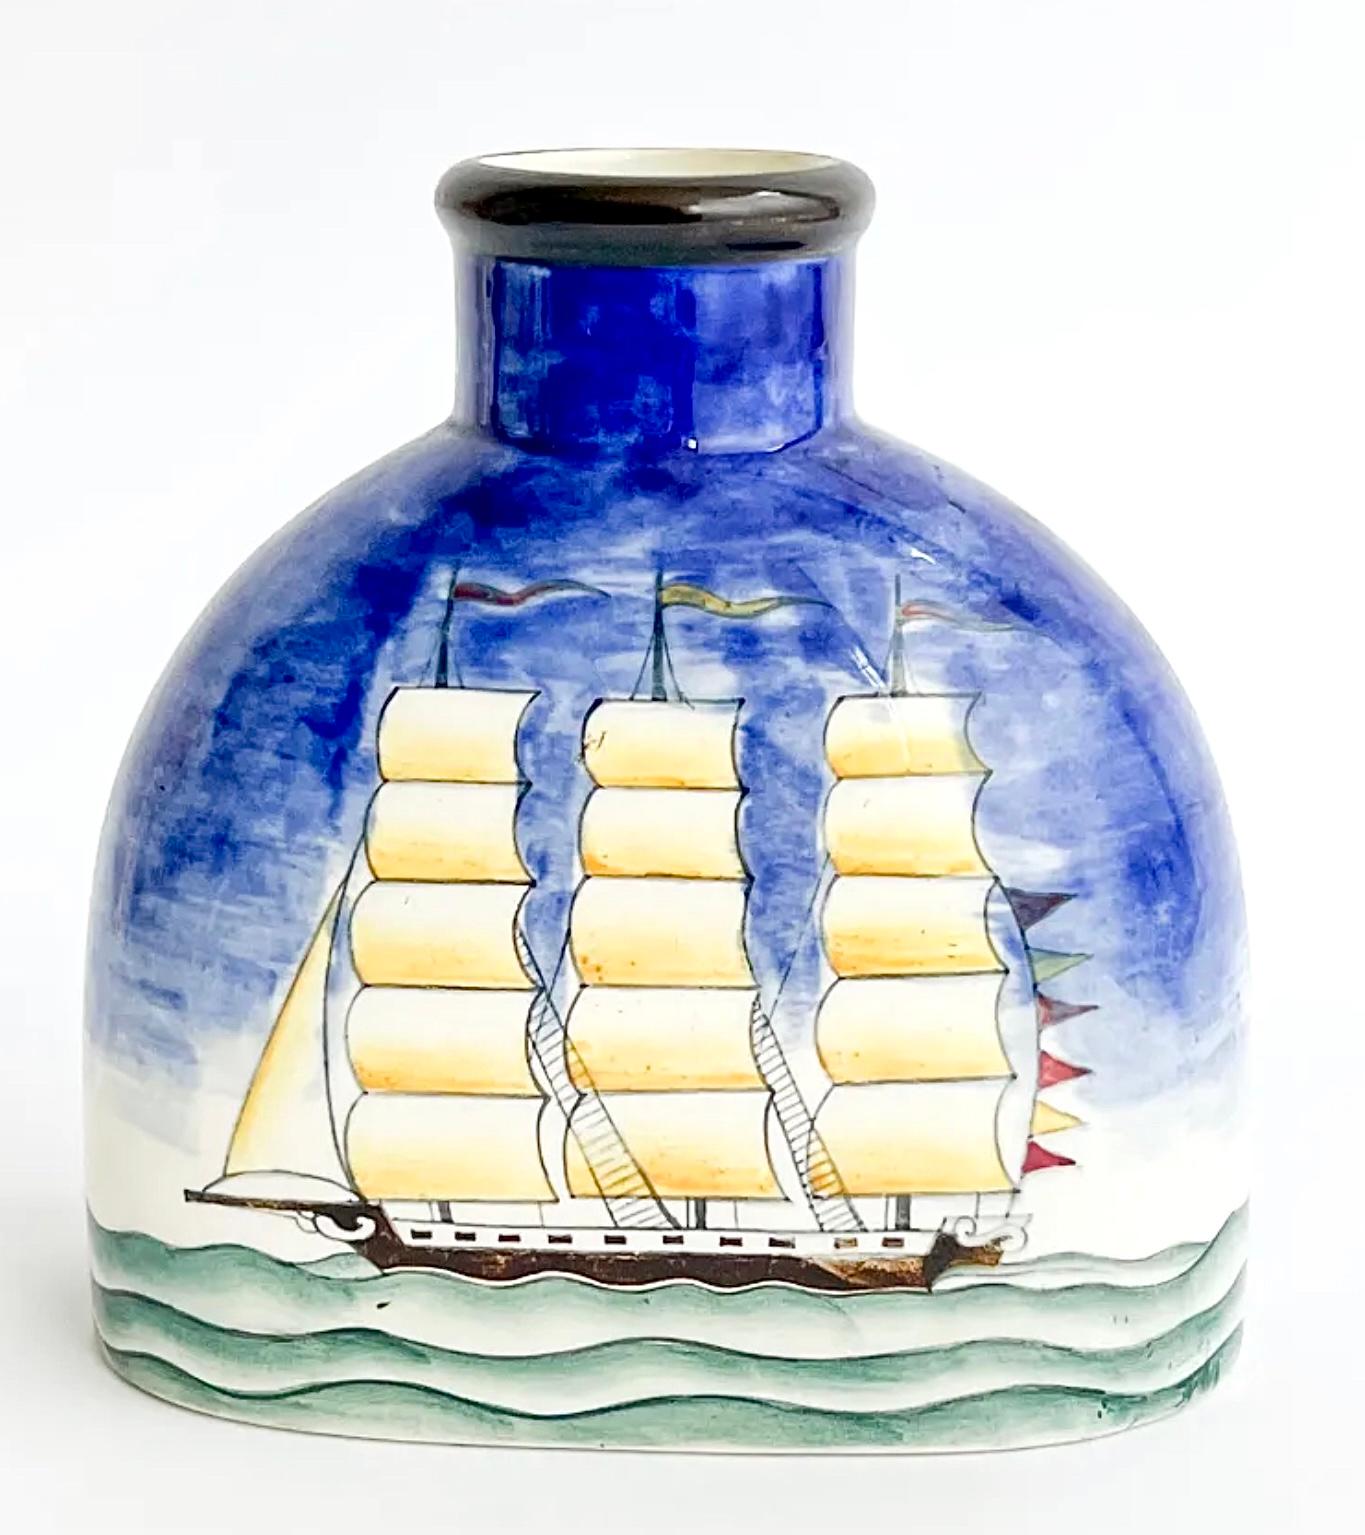 Gio Ponti for Richard Ginori Maritime Vase, Seascape with Boat, Italy, 1930 For Sale 1